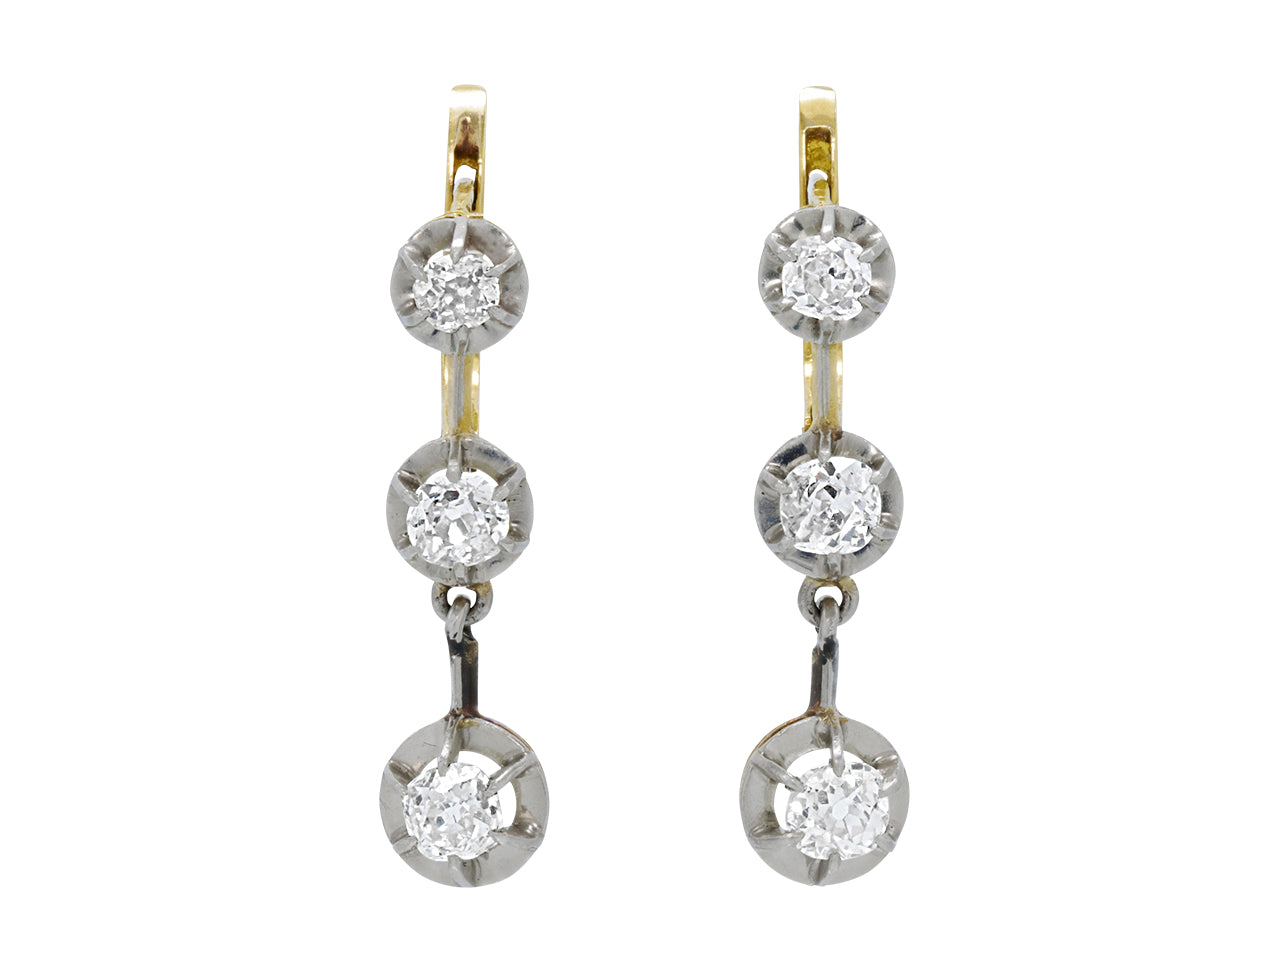 Antique Edwardian Diamond Line Earrings in Platinum over Gold